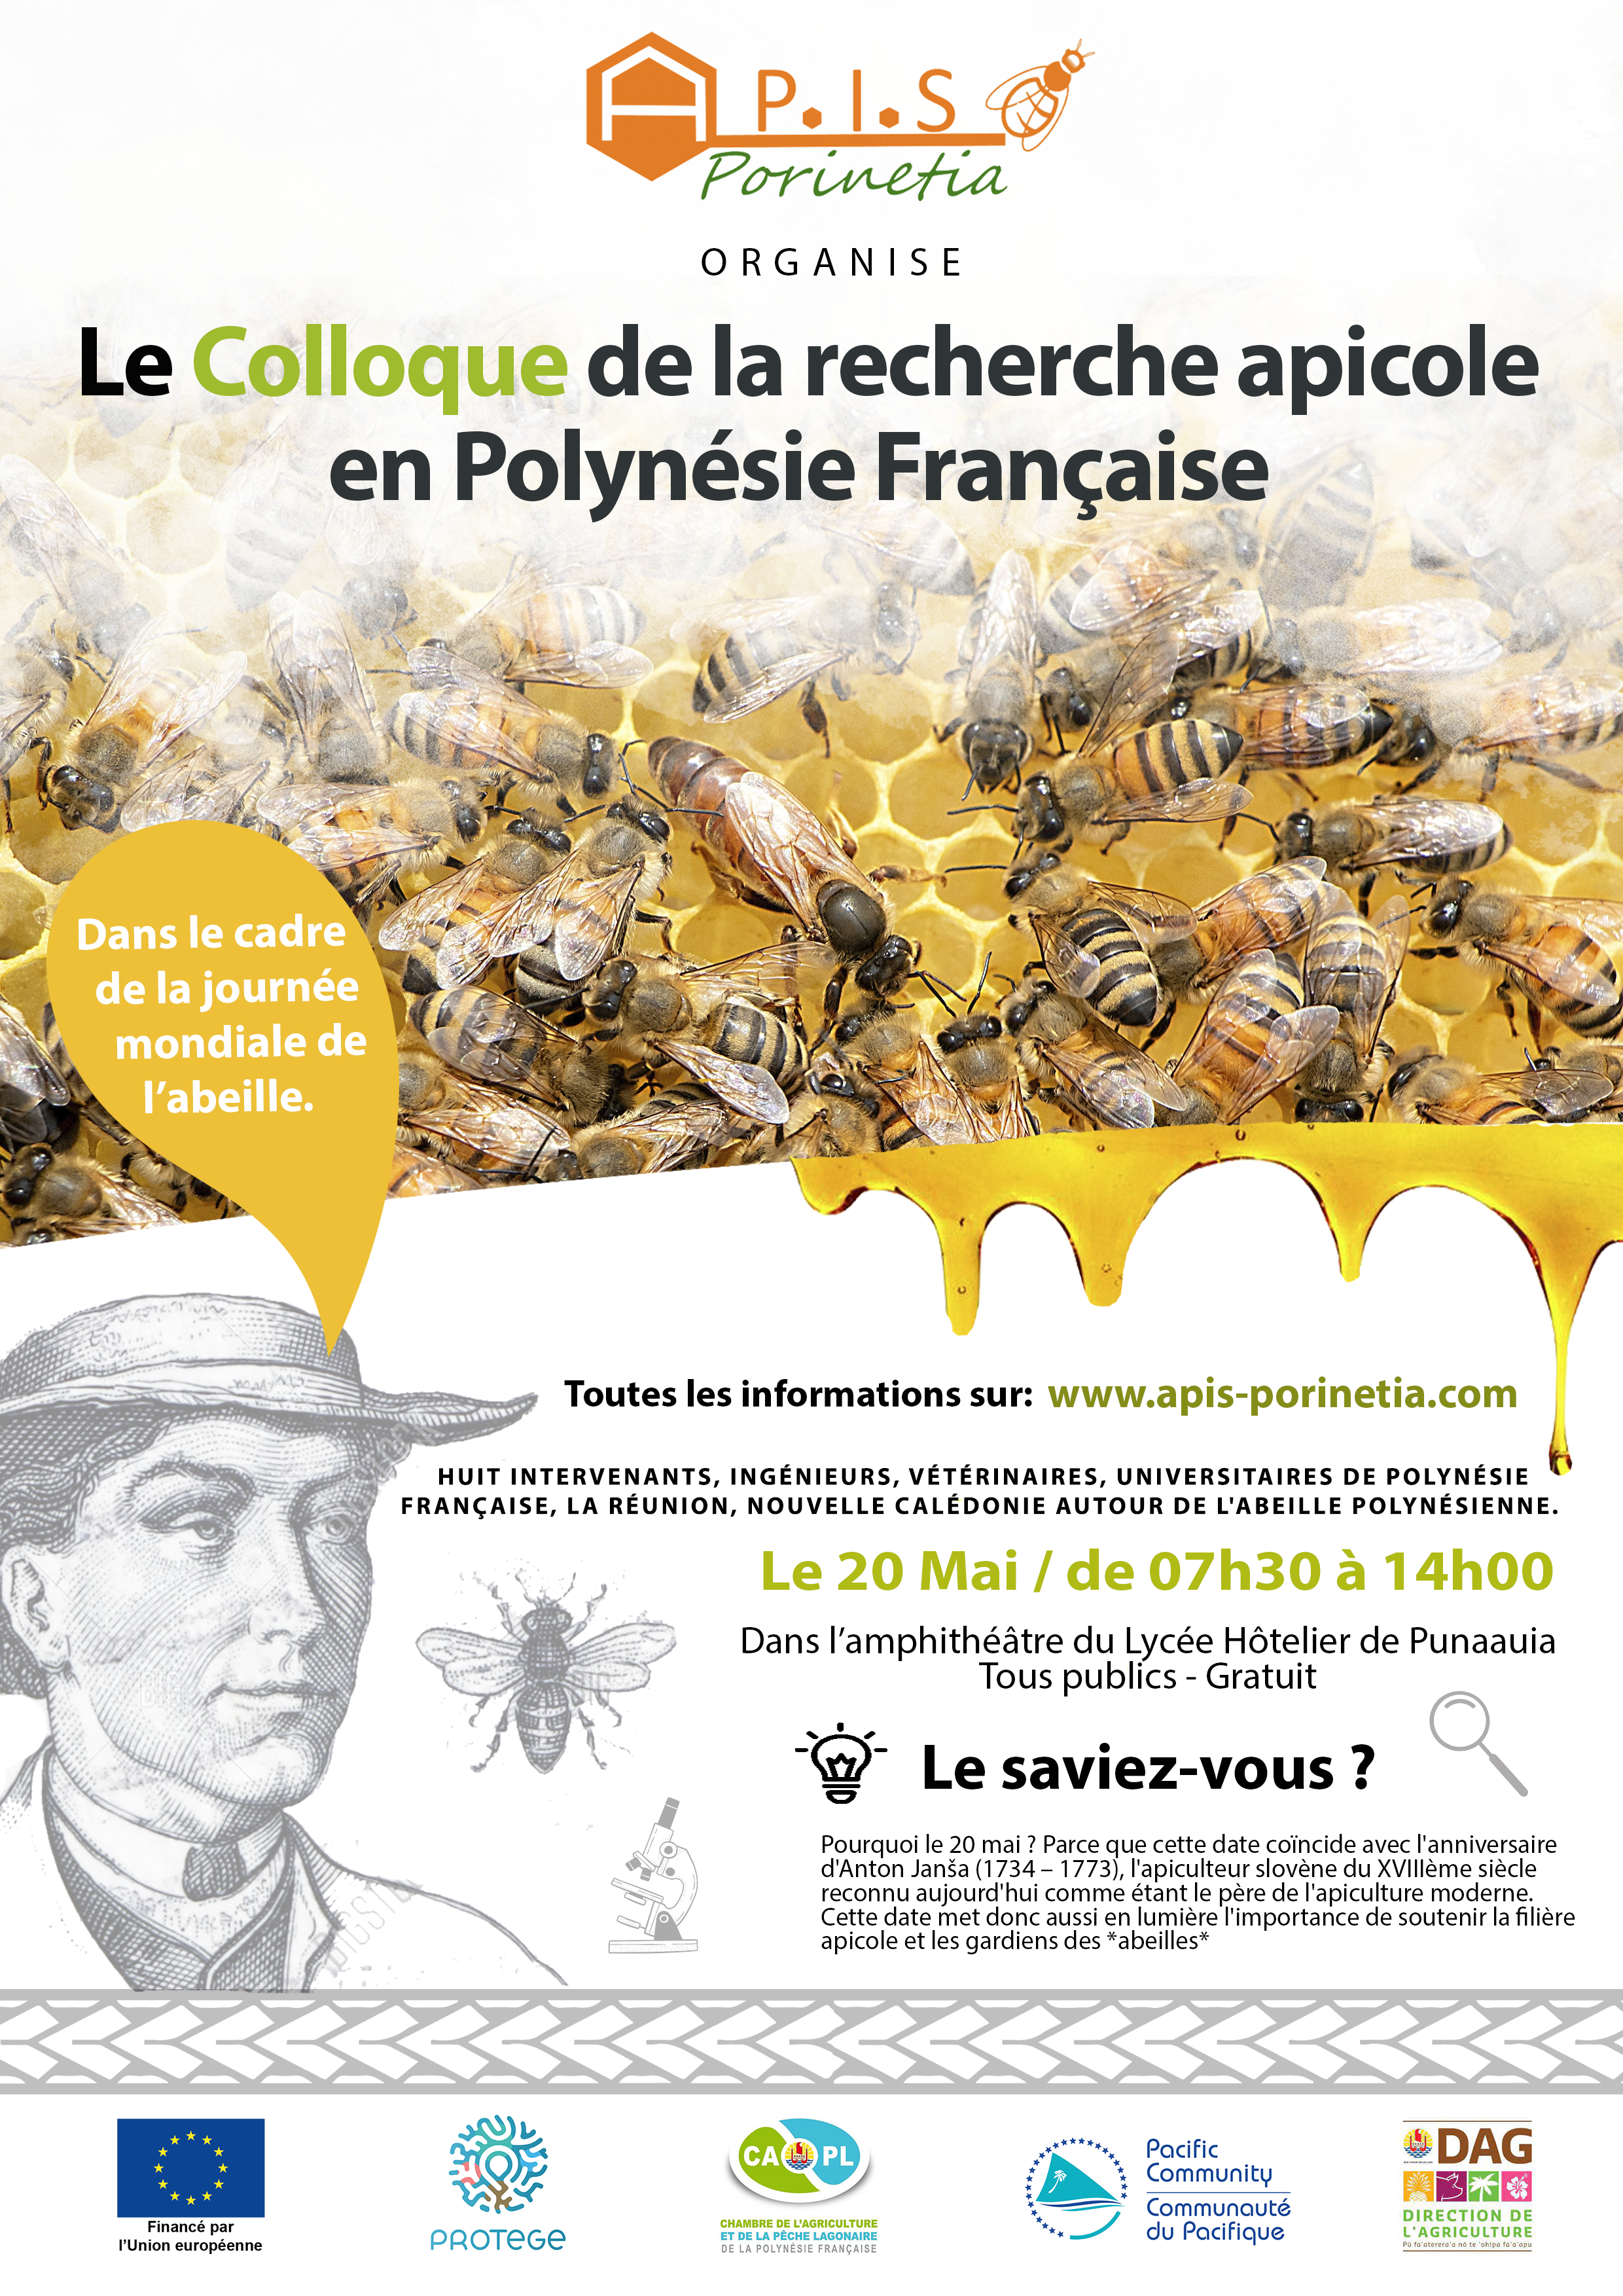 Poster for the French Polynesia beekeeping conference